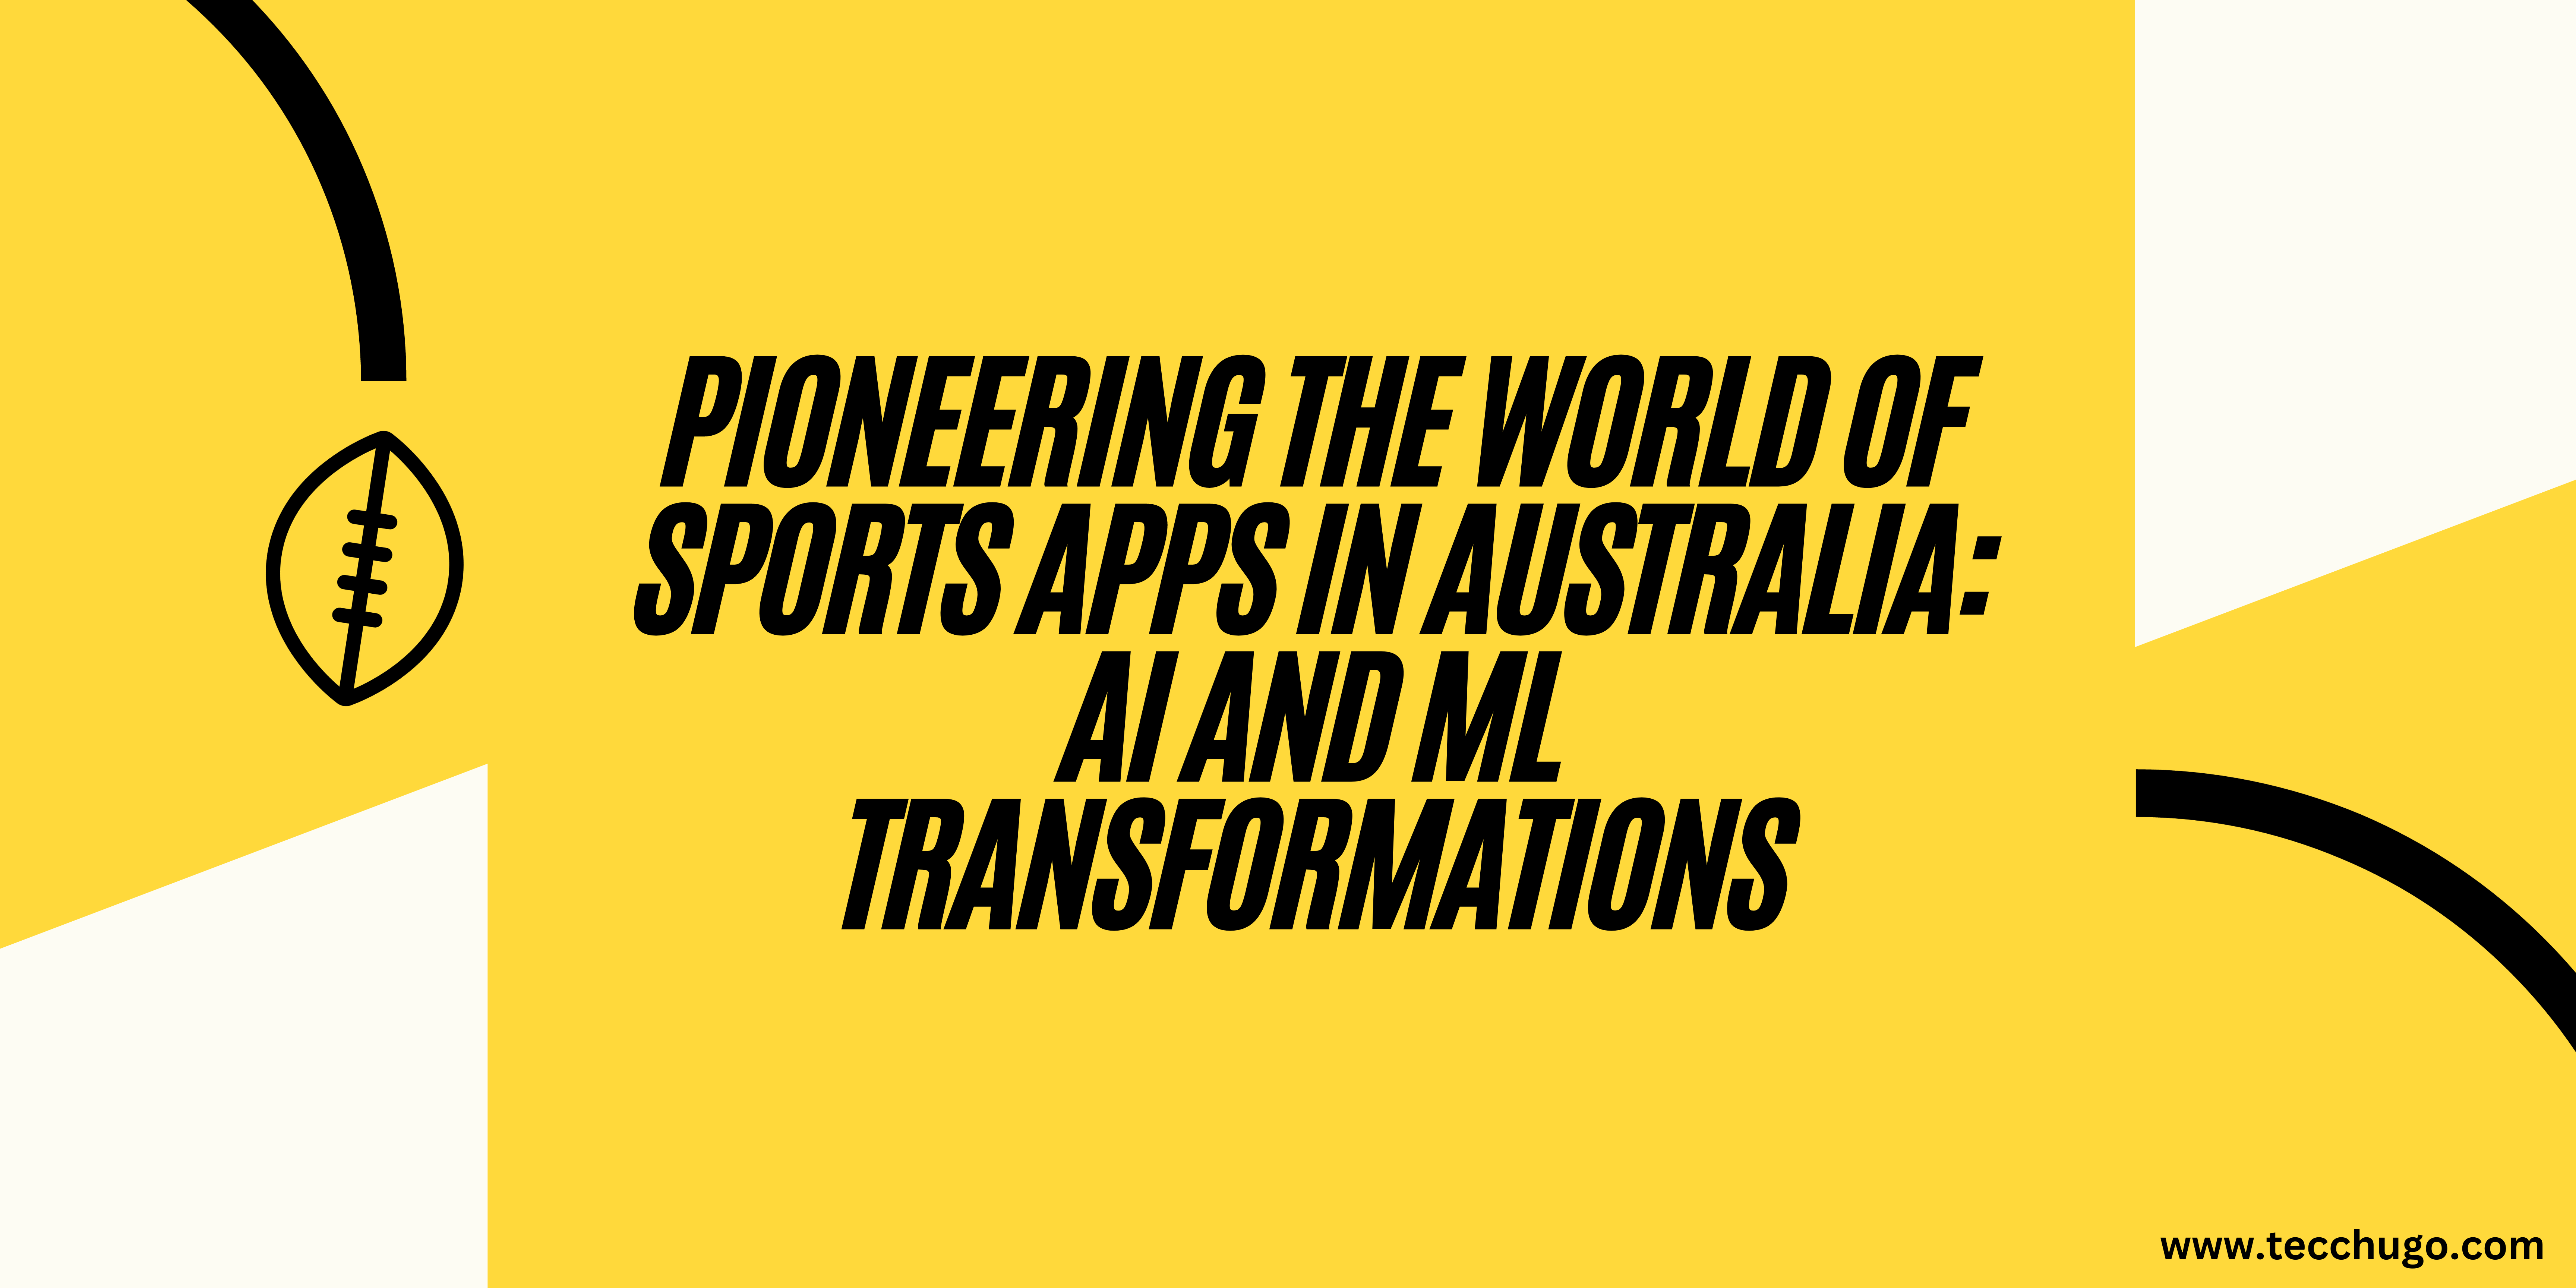 Pioneering the World of Sports Apps in Australia: AI and ML Transformations